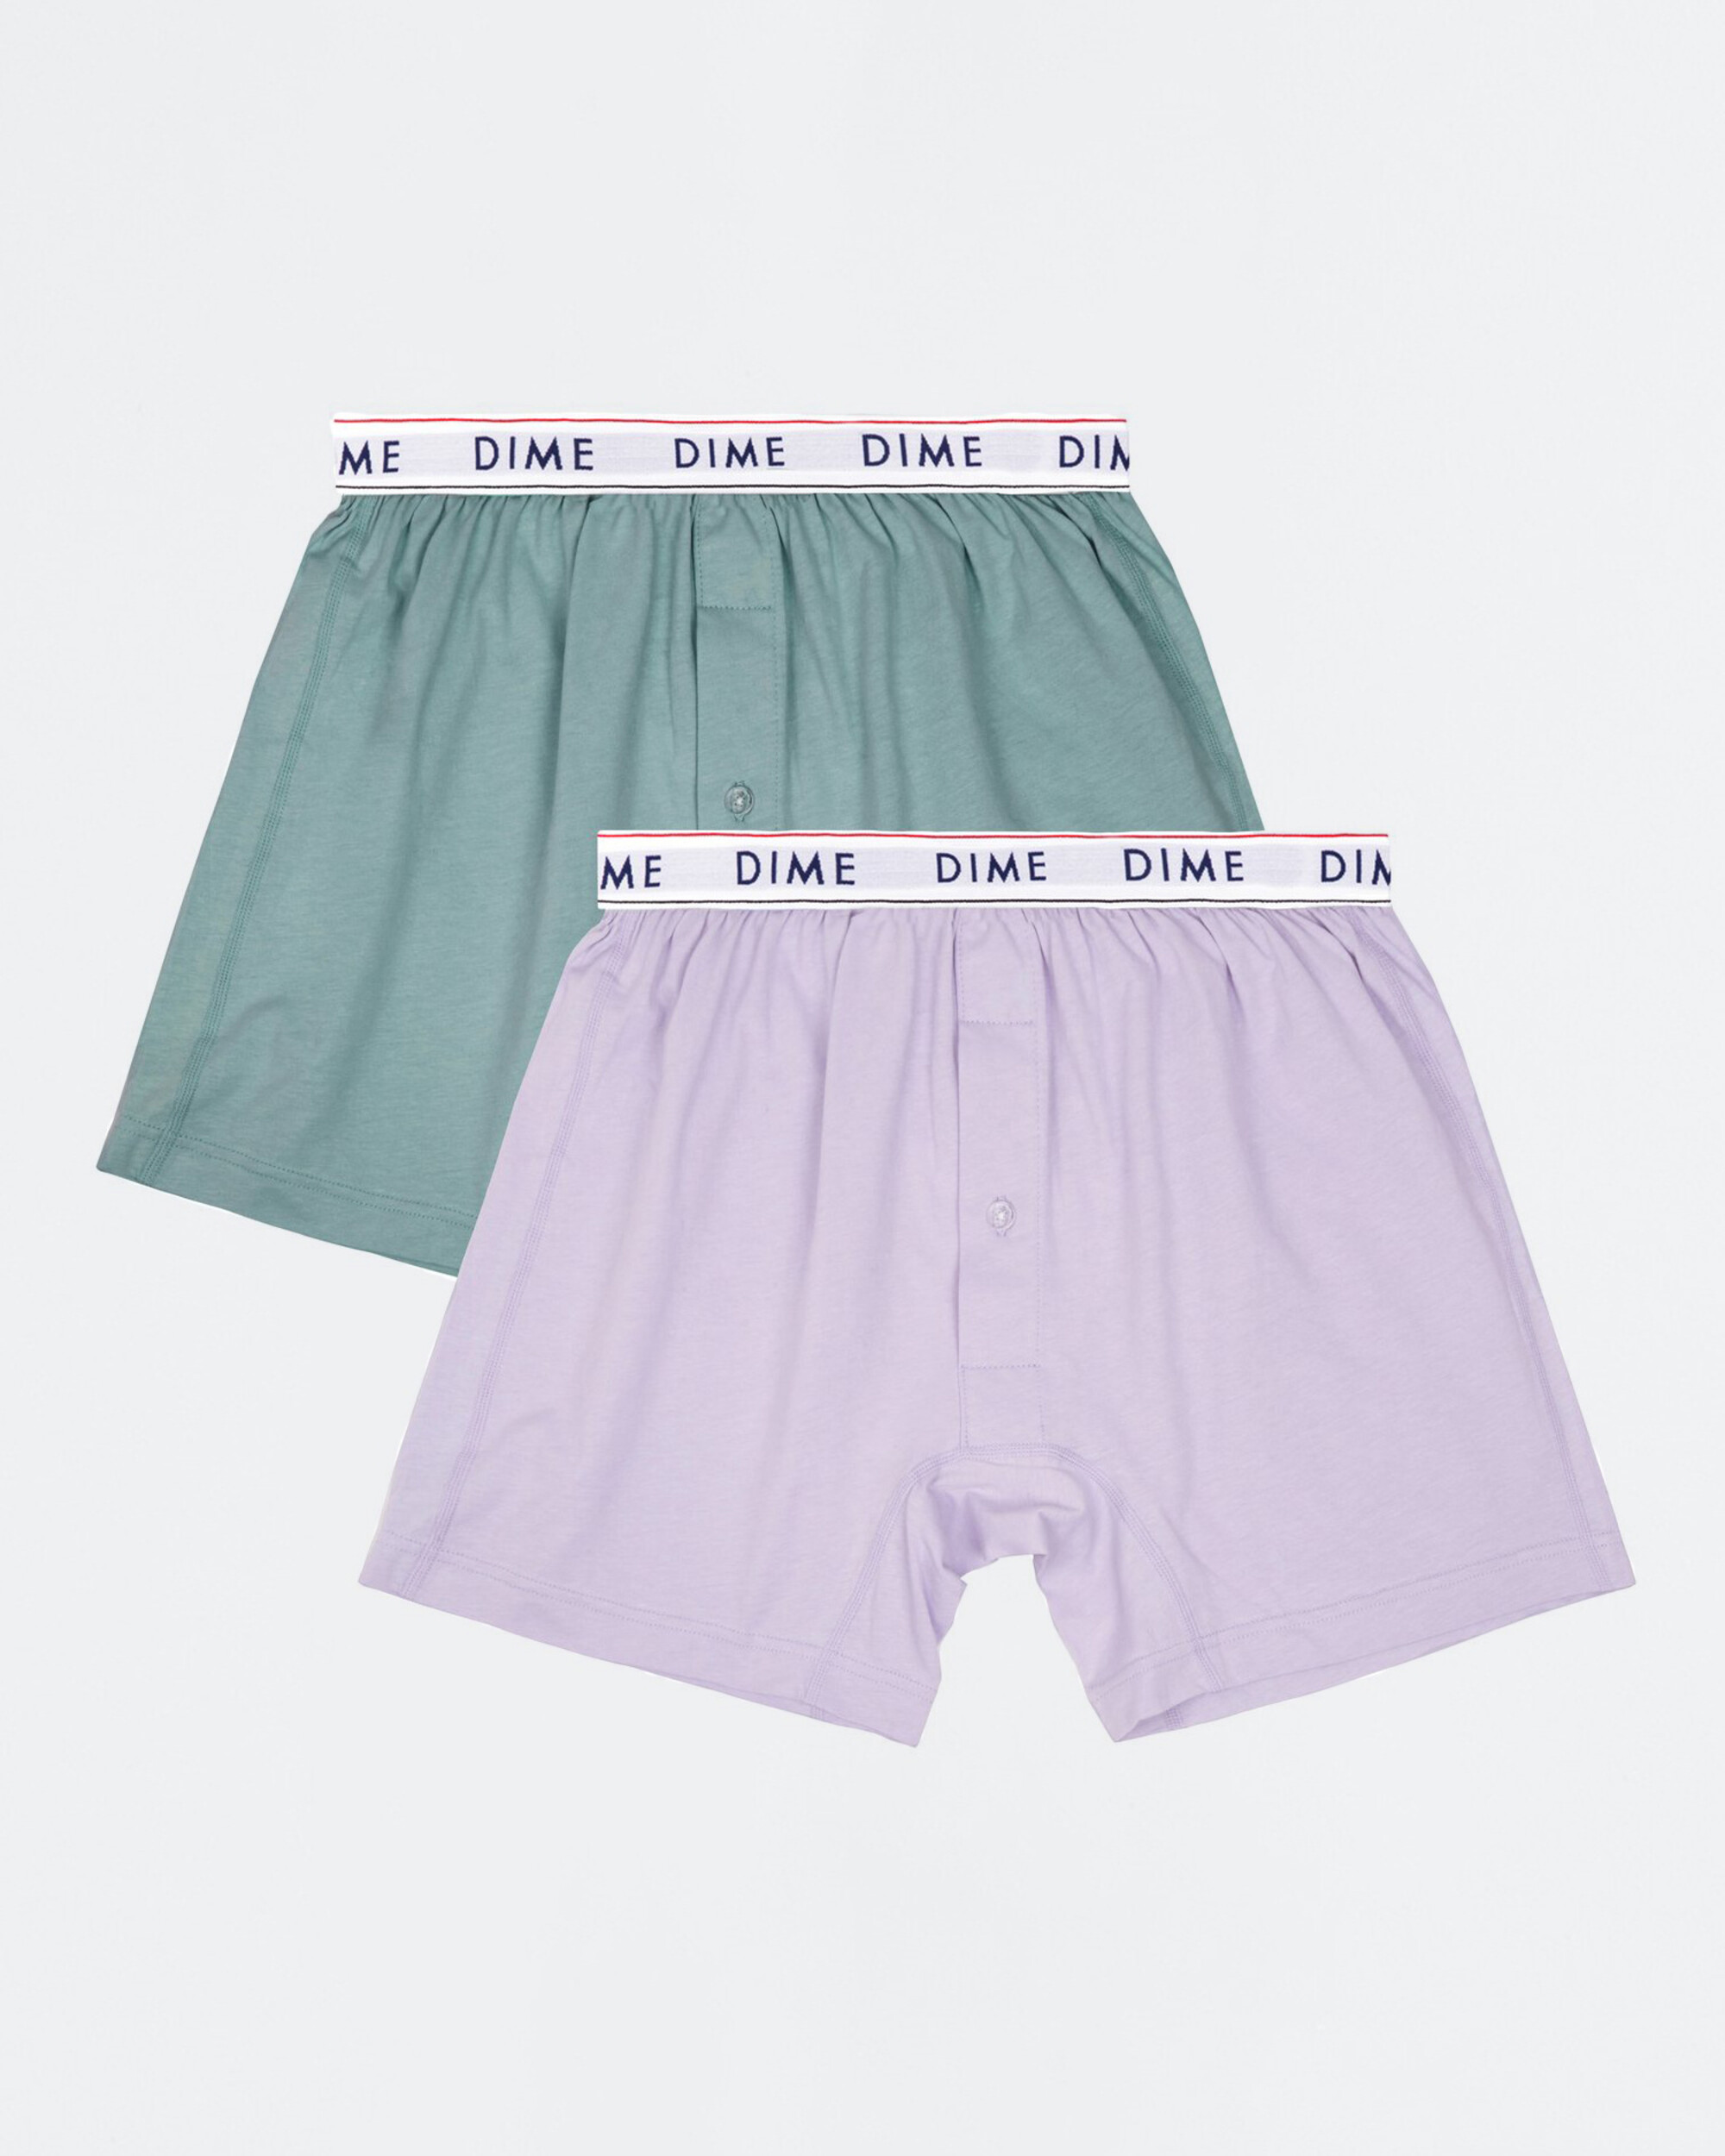 Dime Loose Fit Boxers (2 pack) Green/Light Purple